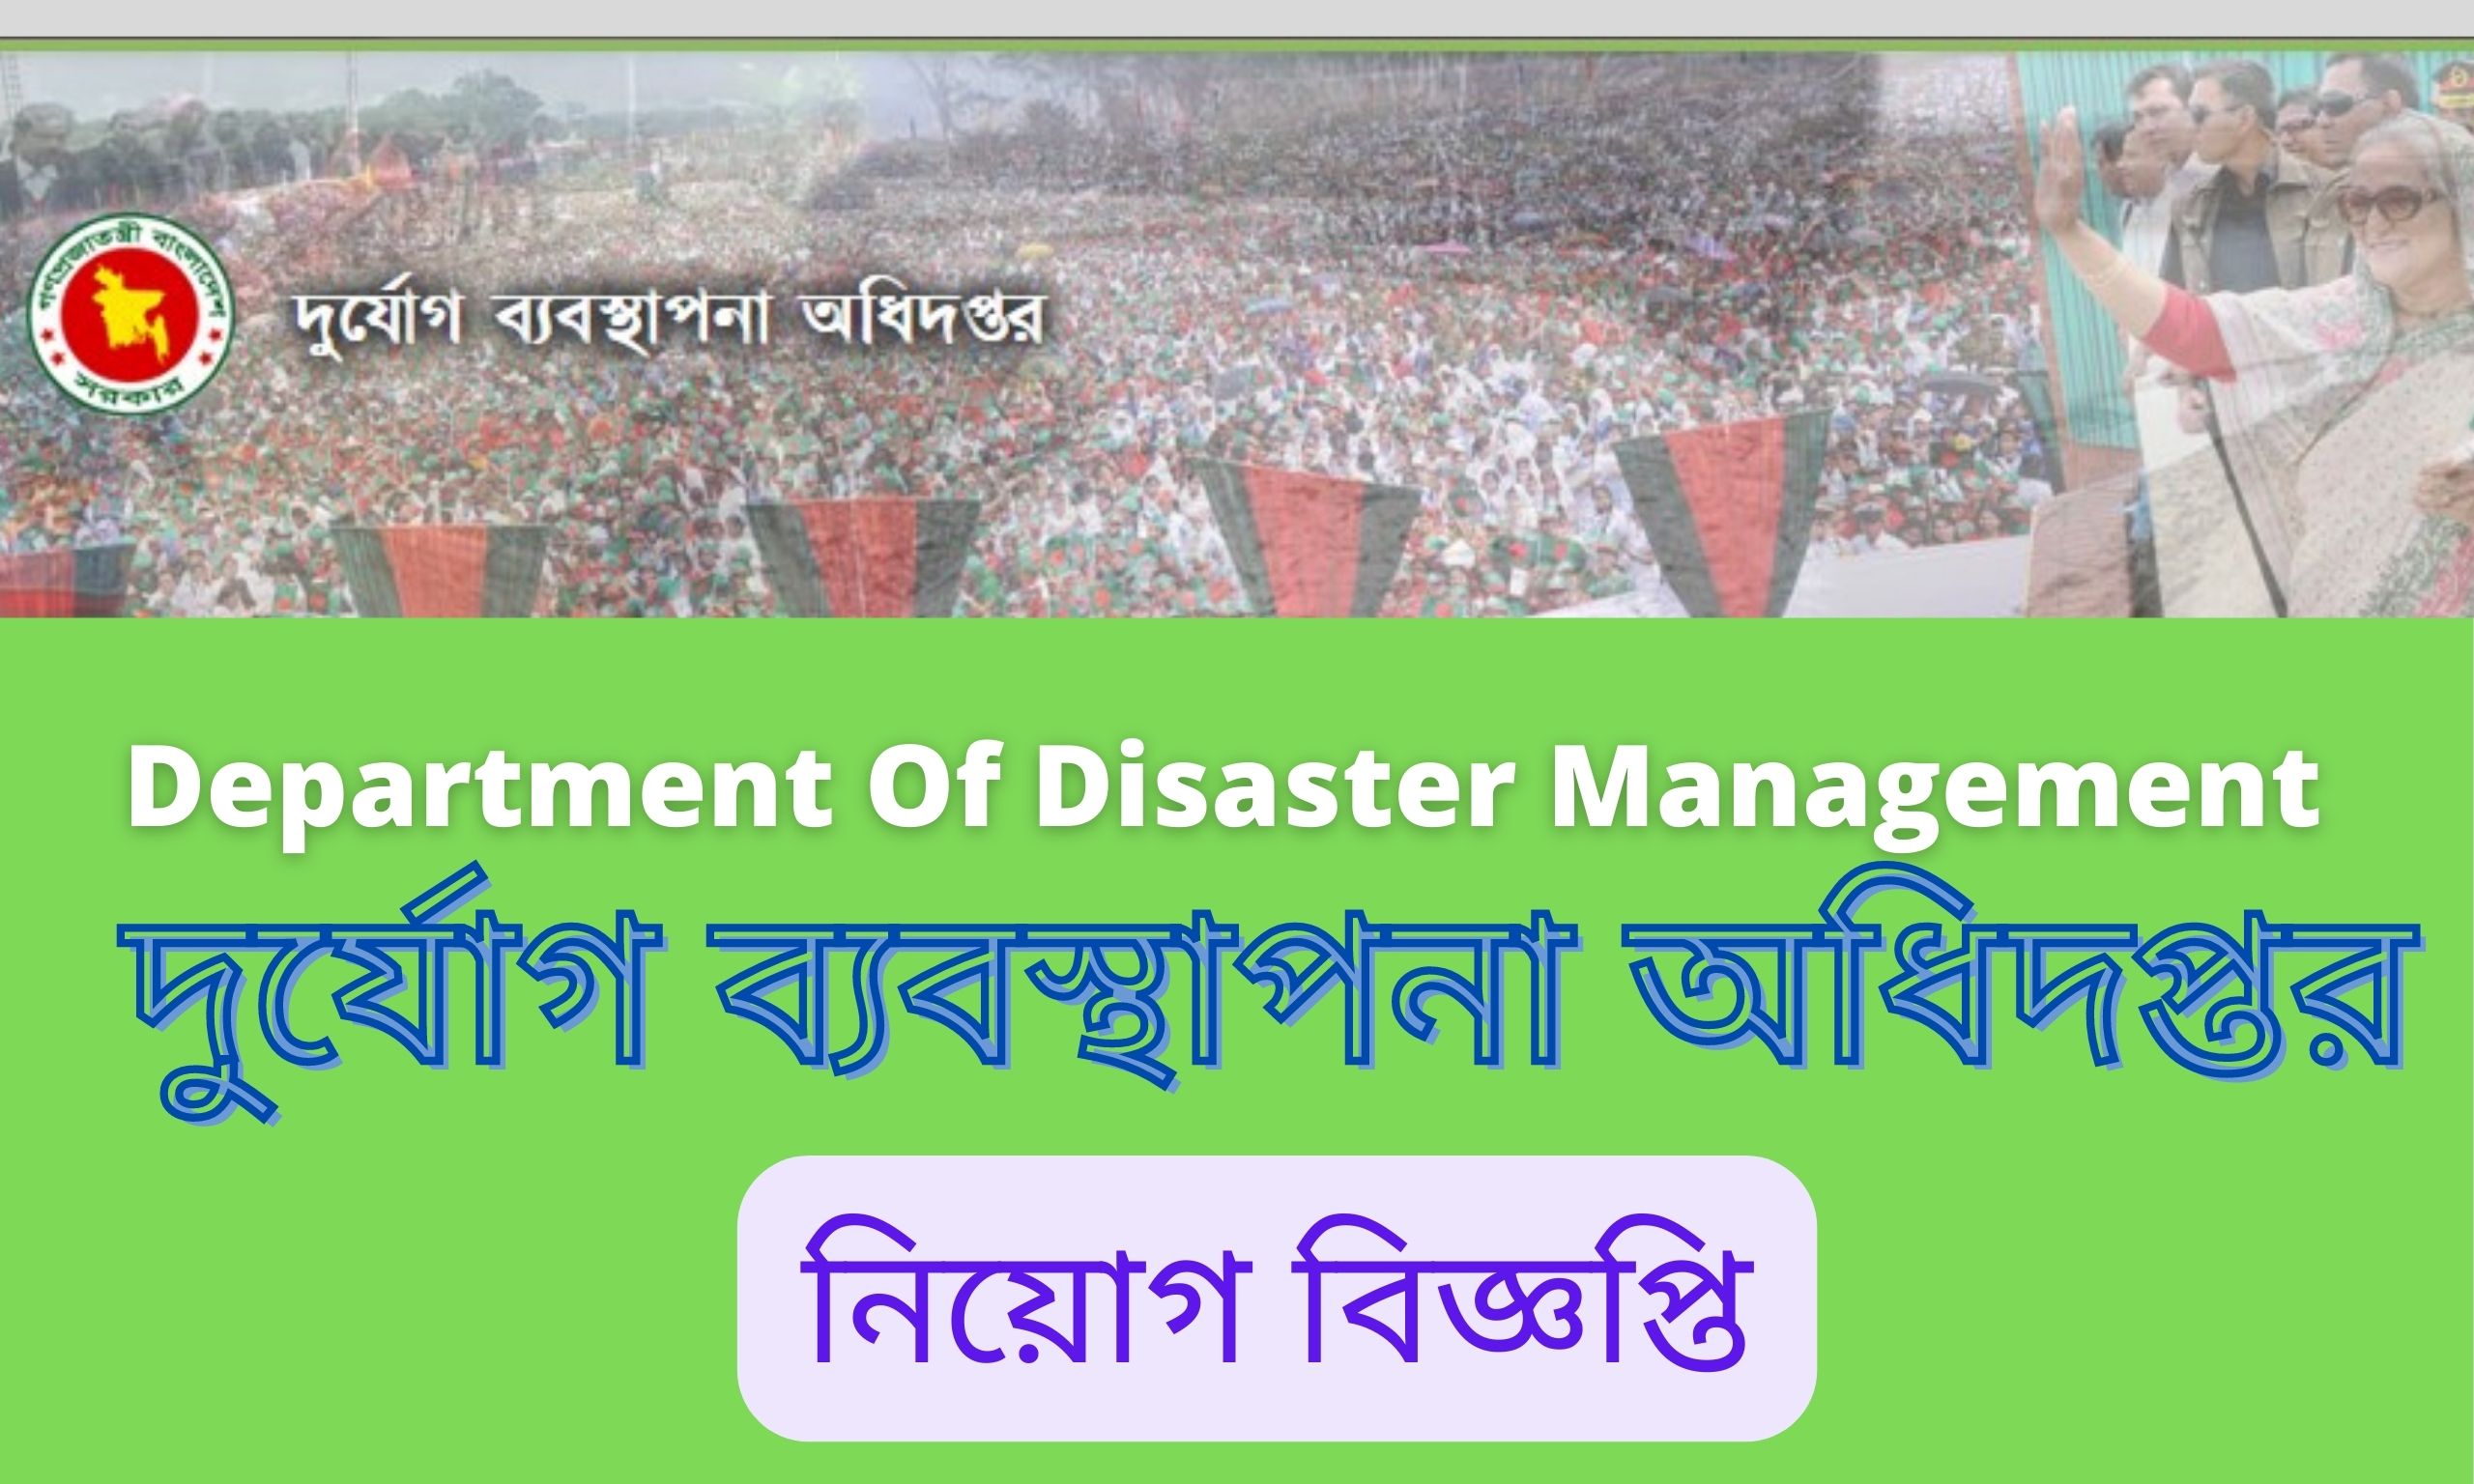 Department of Disaster Management